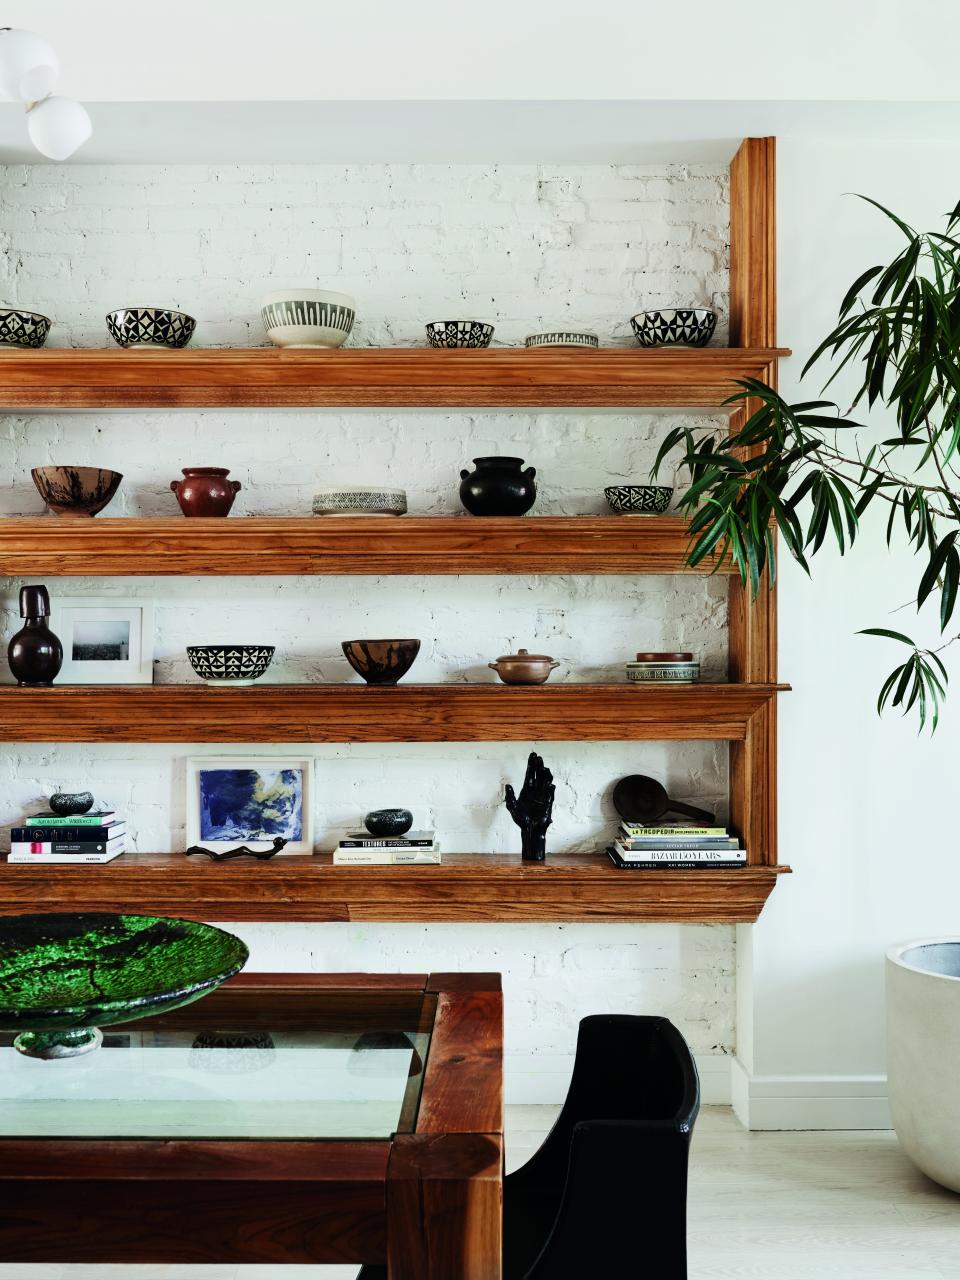 Designer Carly Cushnie’s expansive collection of ceramics and glassware, many picked up on her travels abroad.